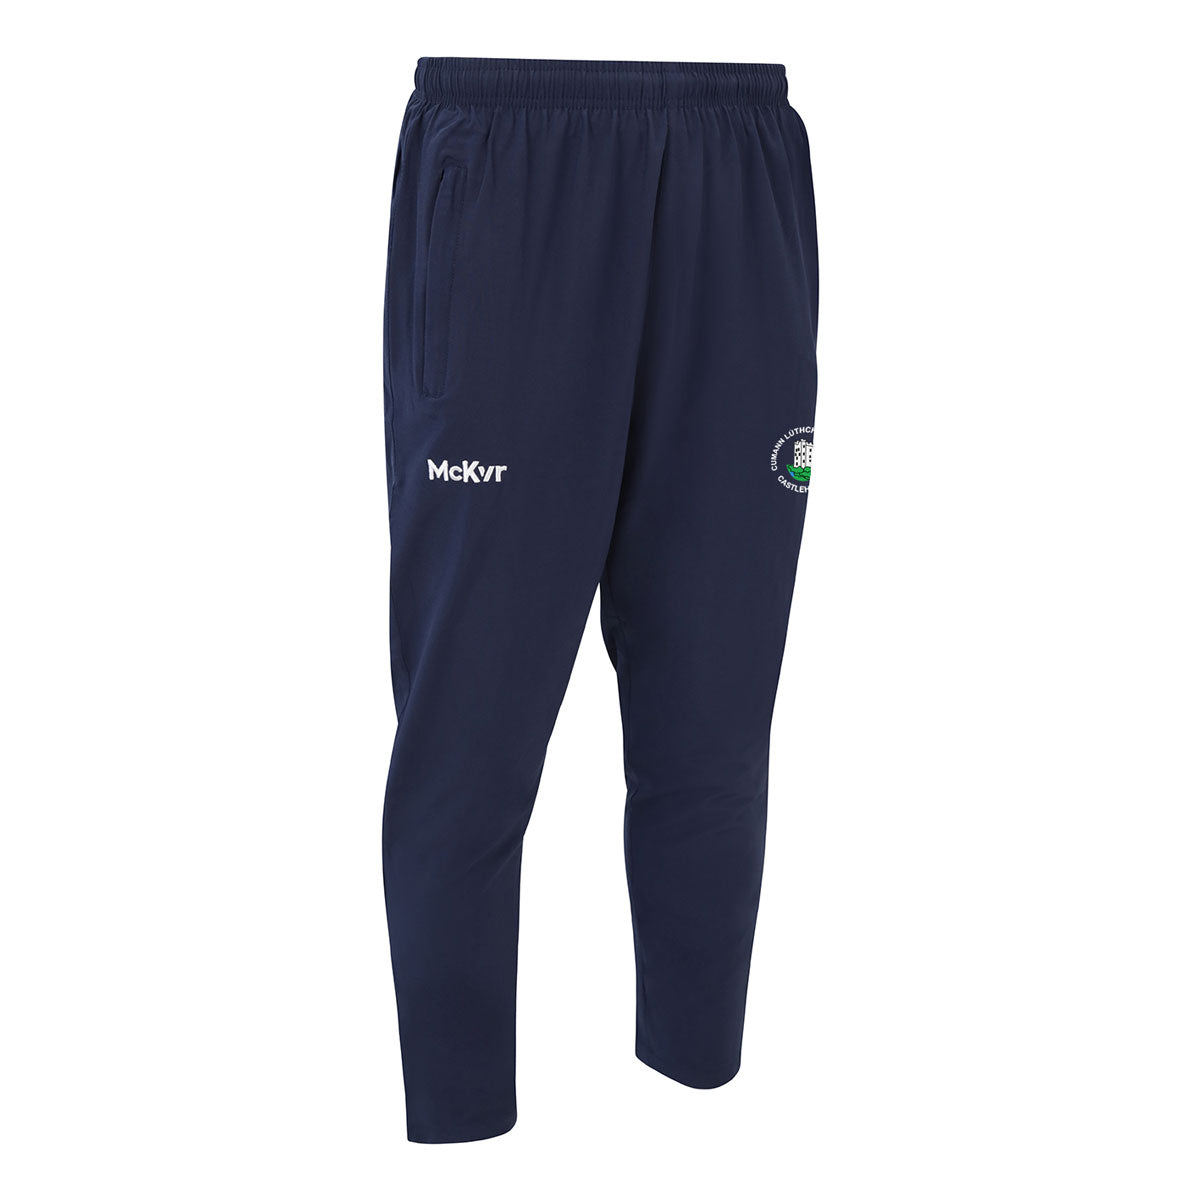 Mc Keever Castlehaven GAA Core 22 Tapered Pants - Adult - Navy